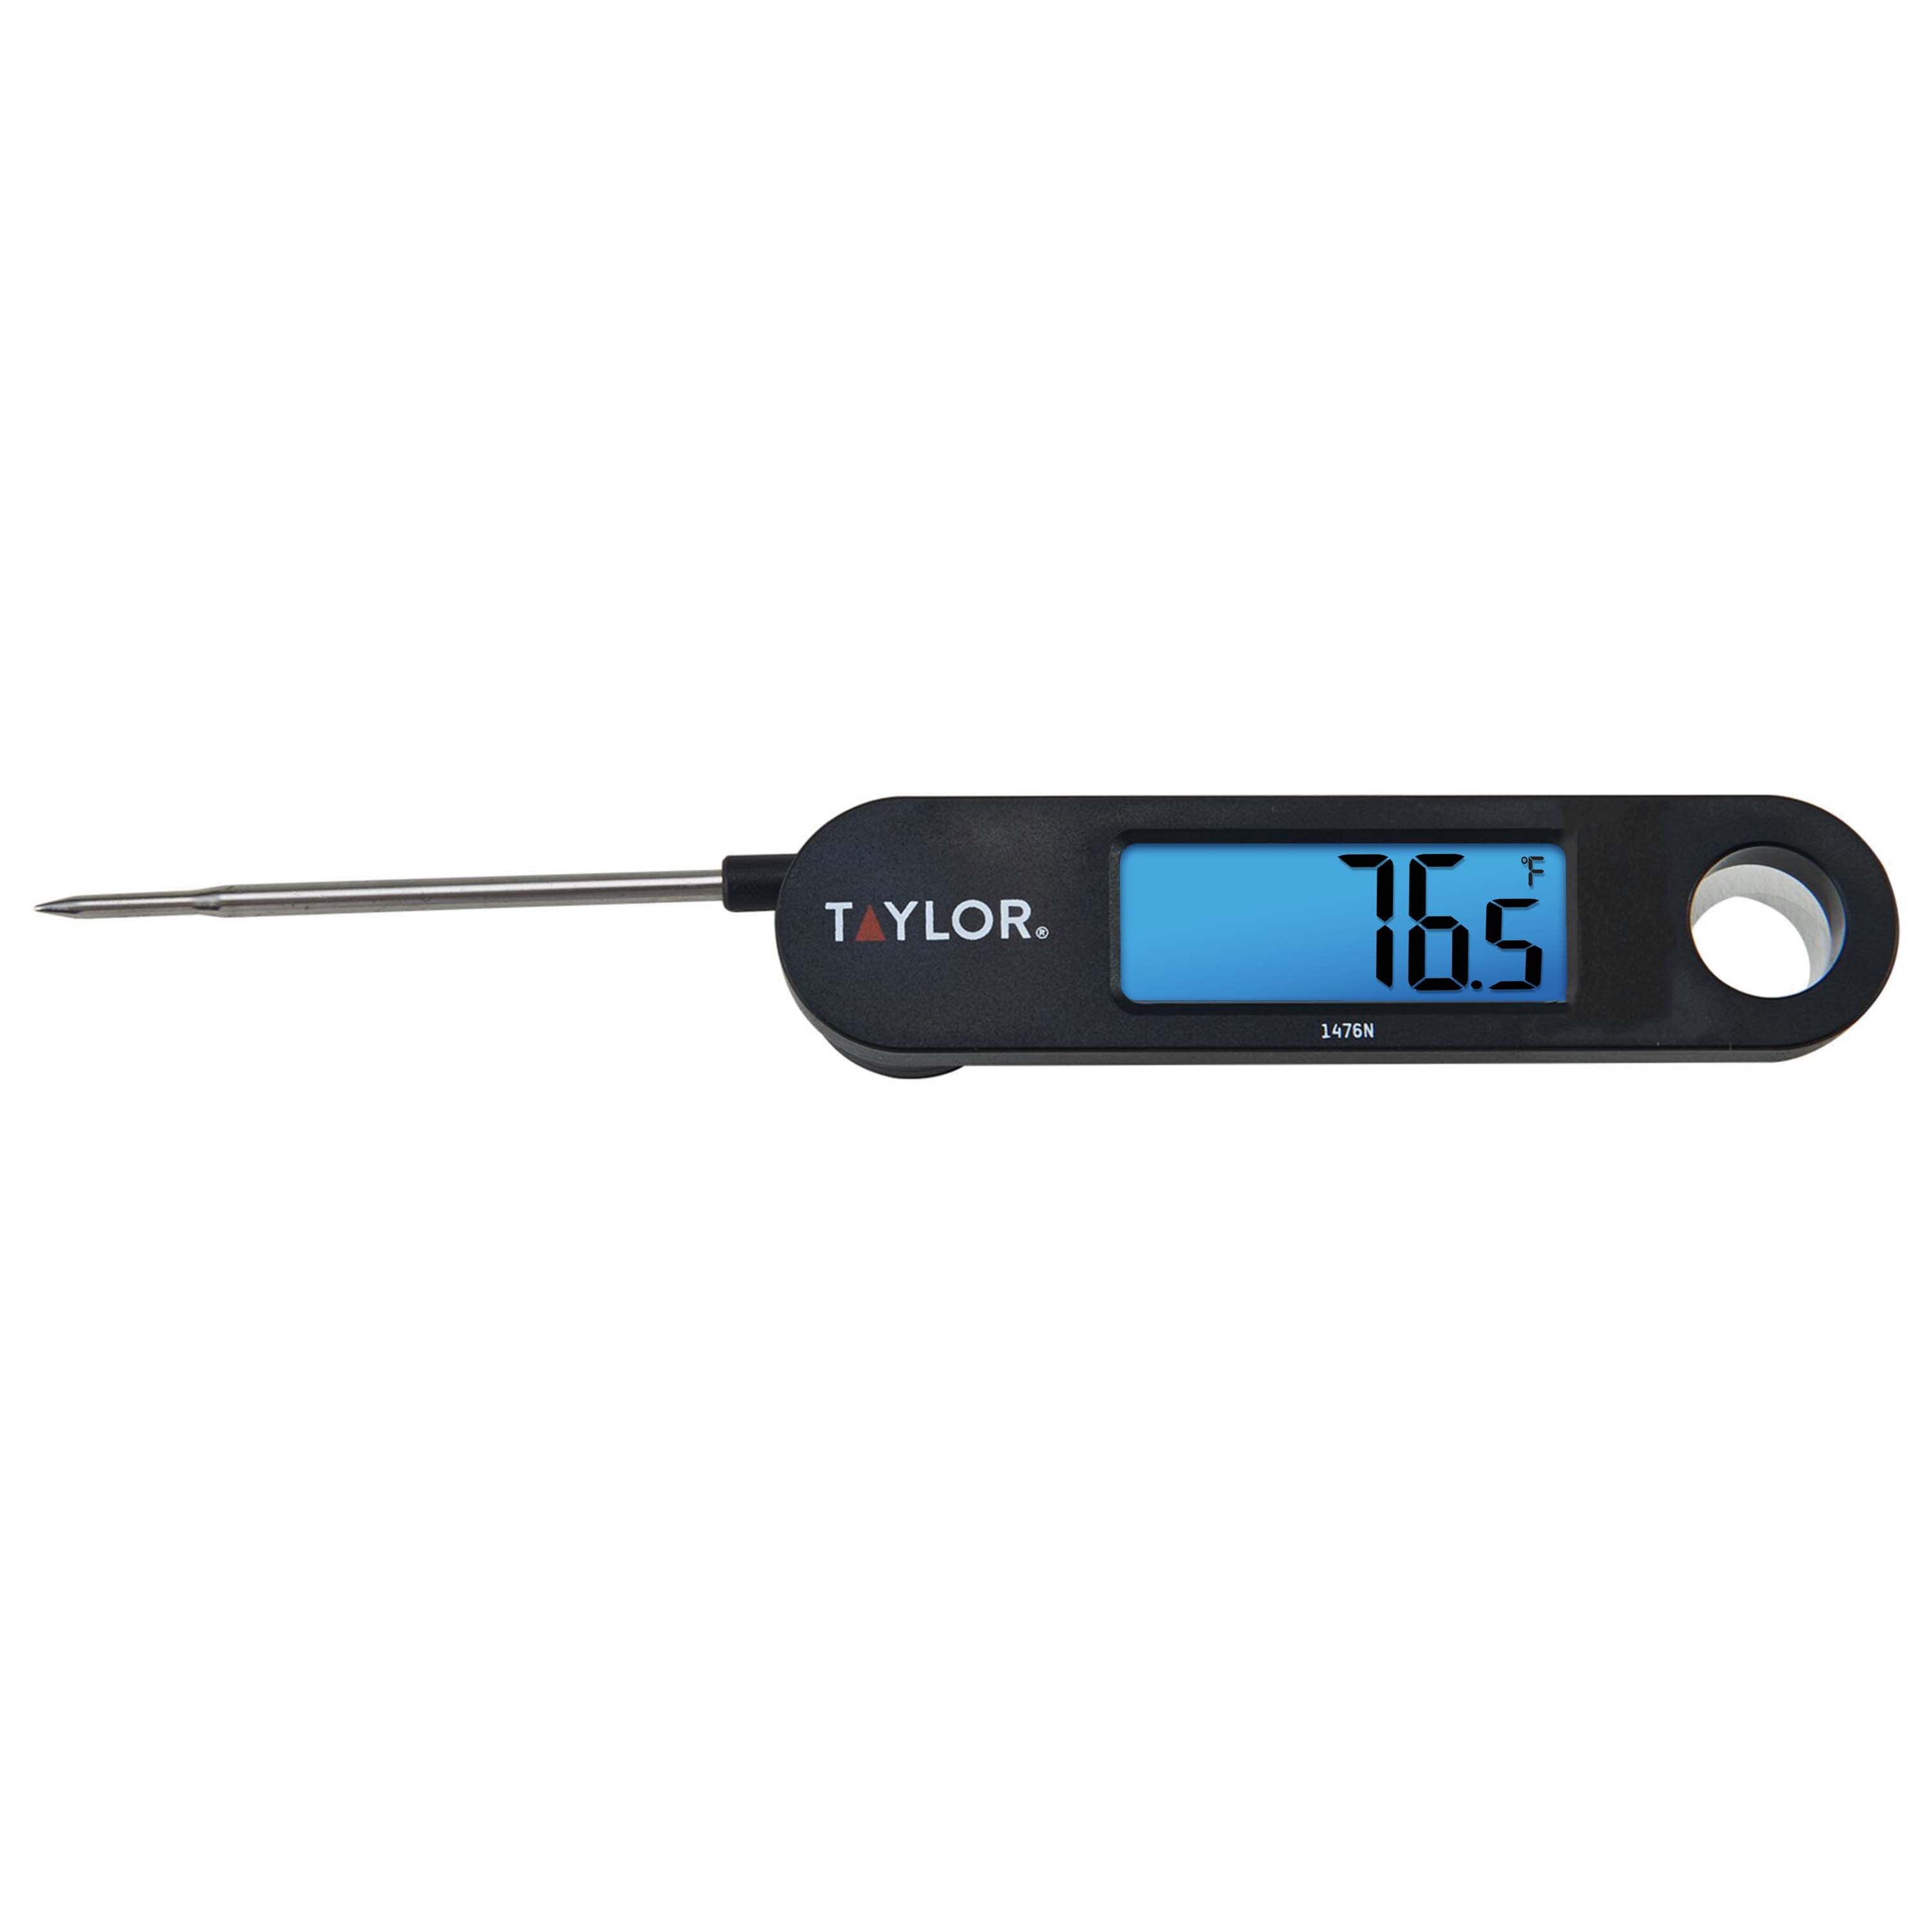 Taylor Leave in Meat Thermometer by World Market